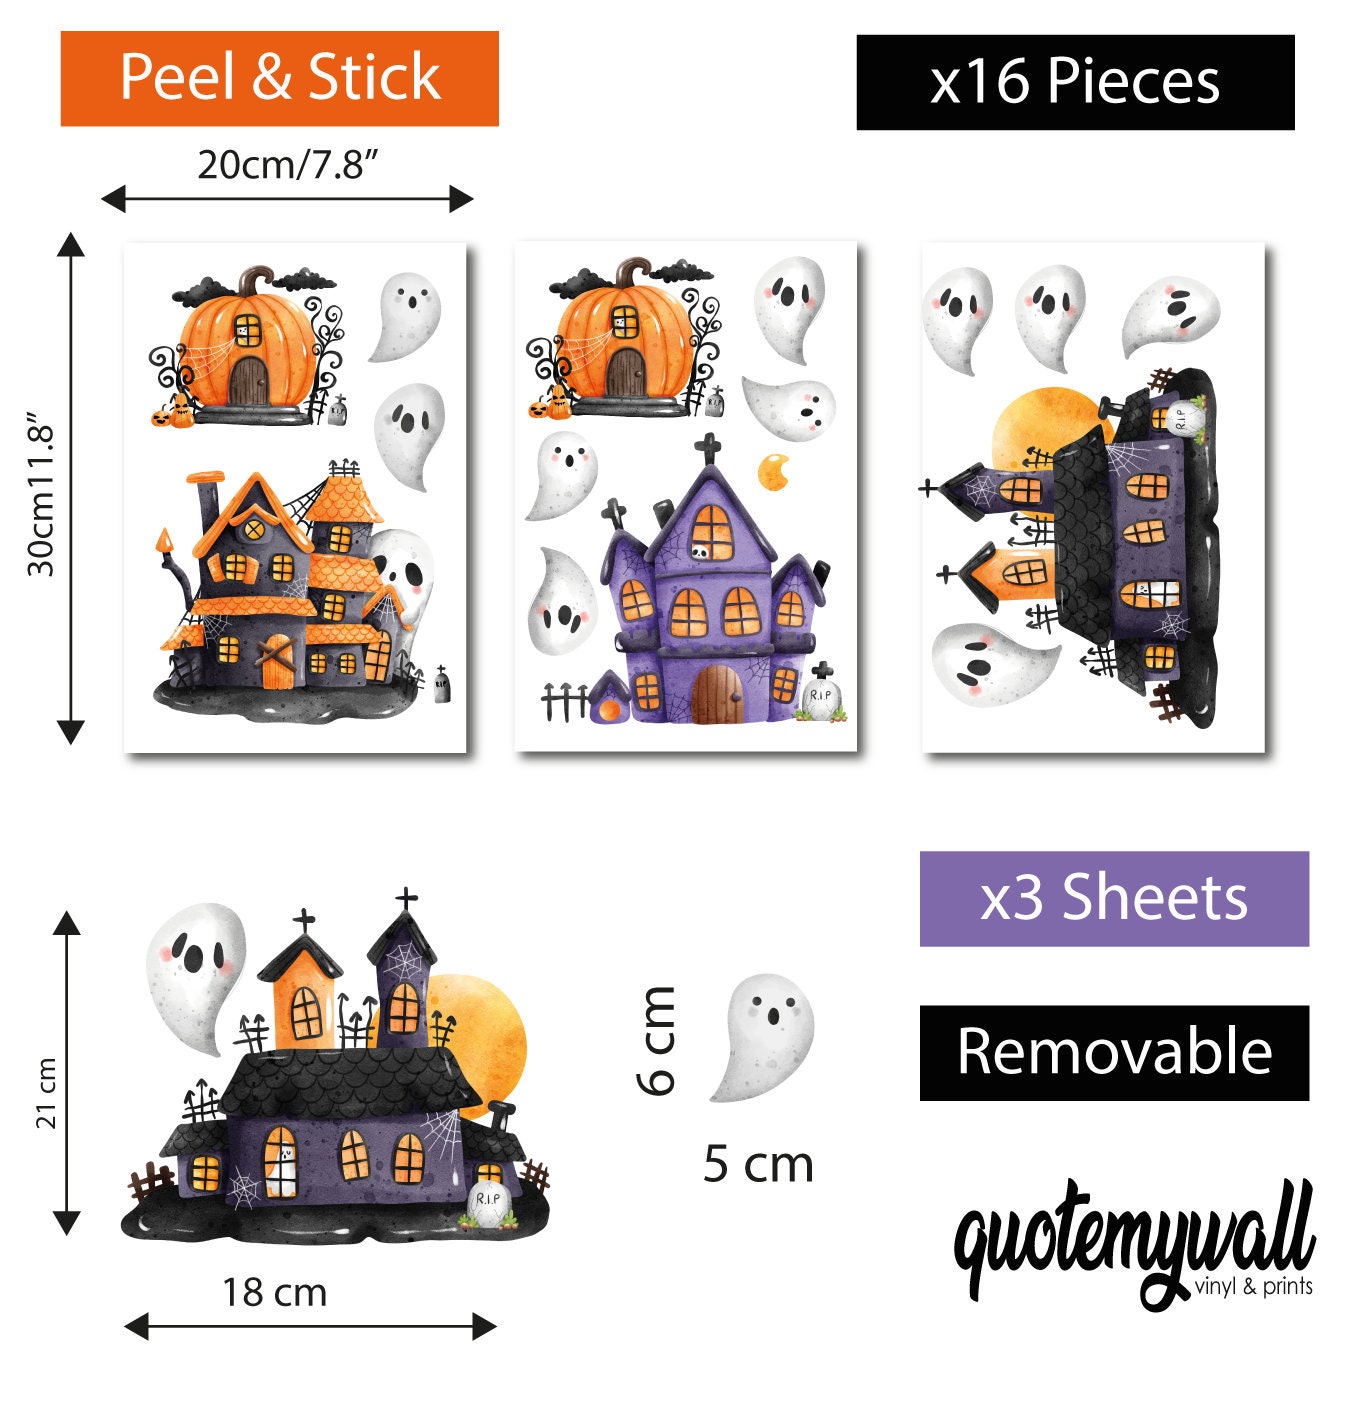 Haunted House Halloween Decorations Window Stickers Pumpkin Grave Scary Spooky Decals Removable